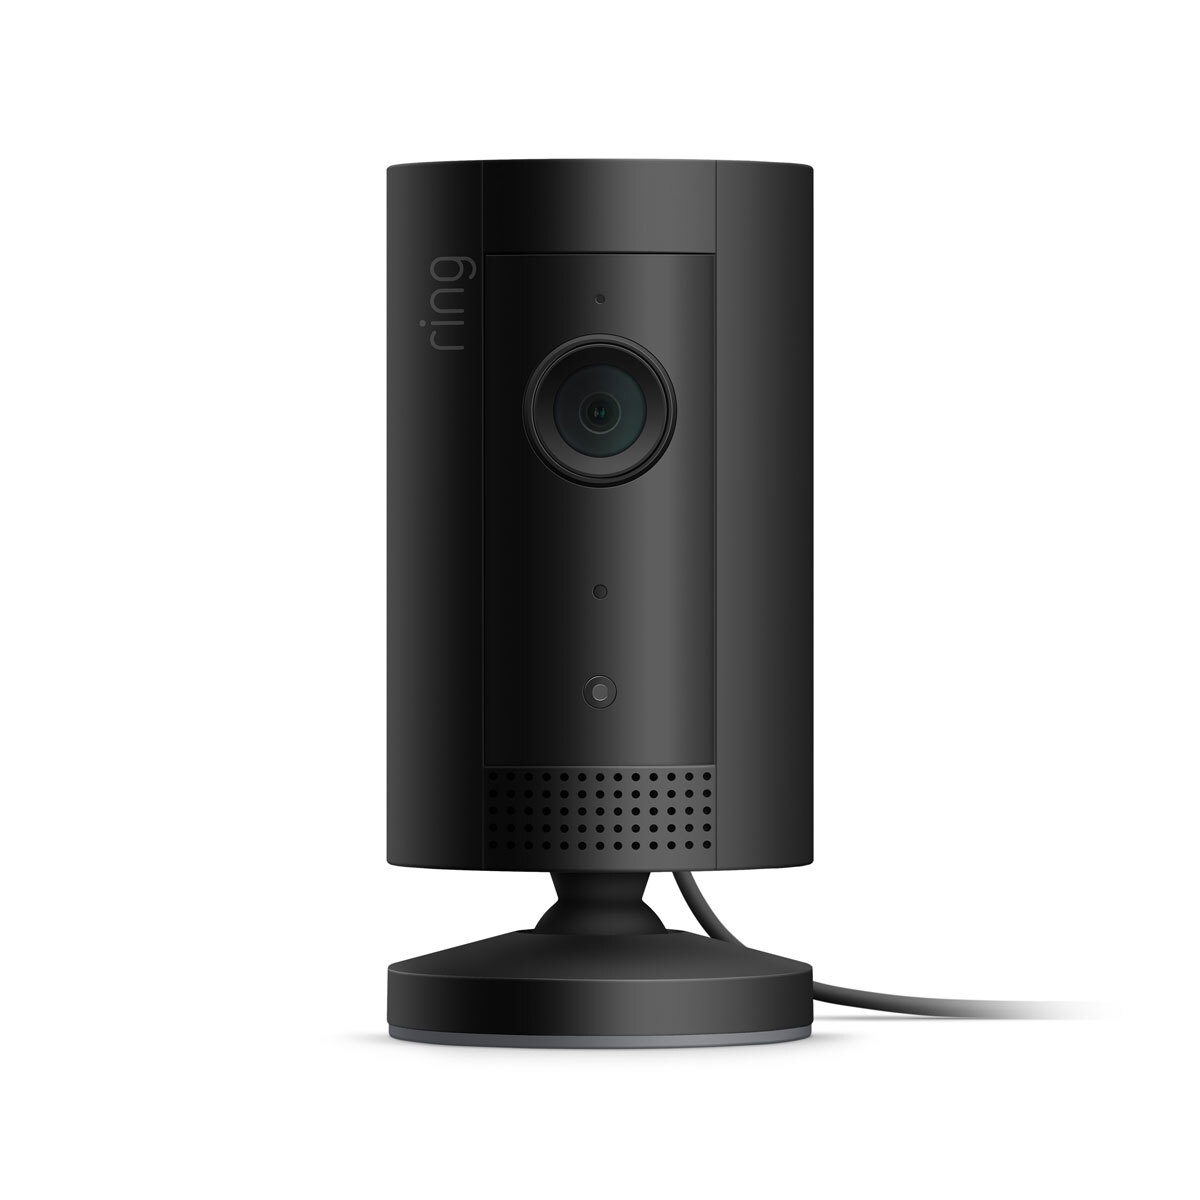 Cut out image of indoor cam on white background